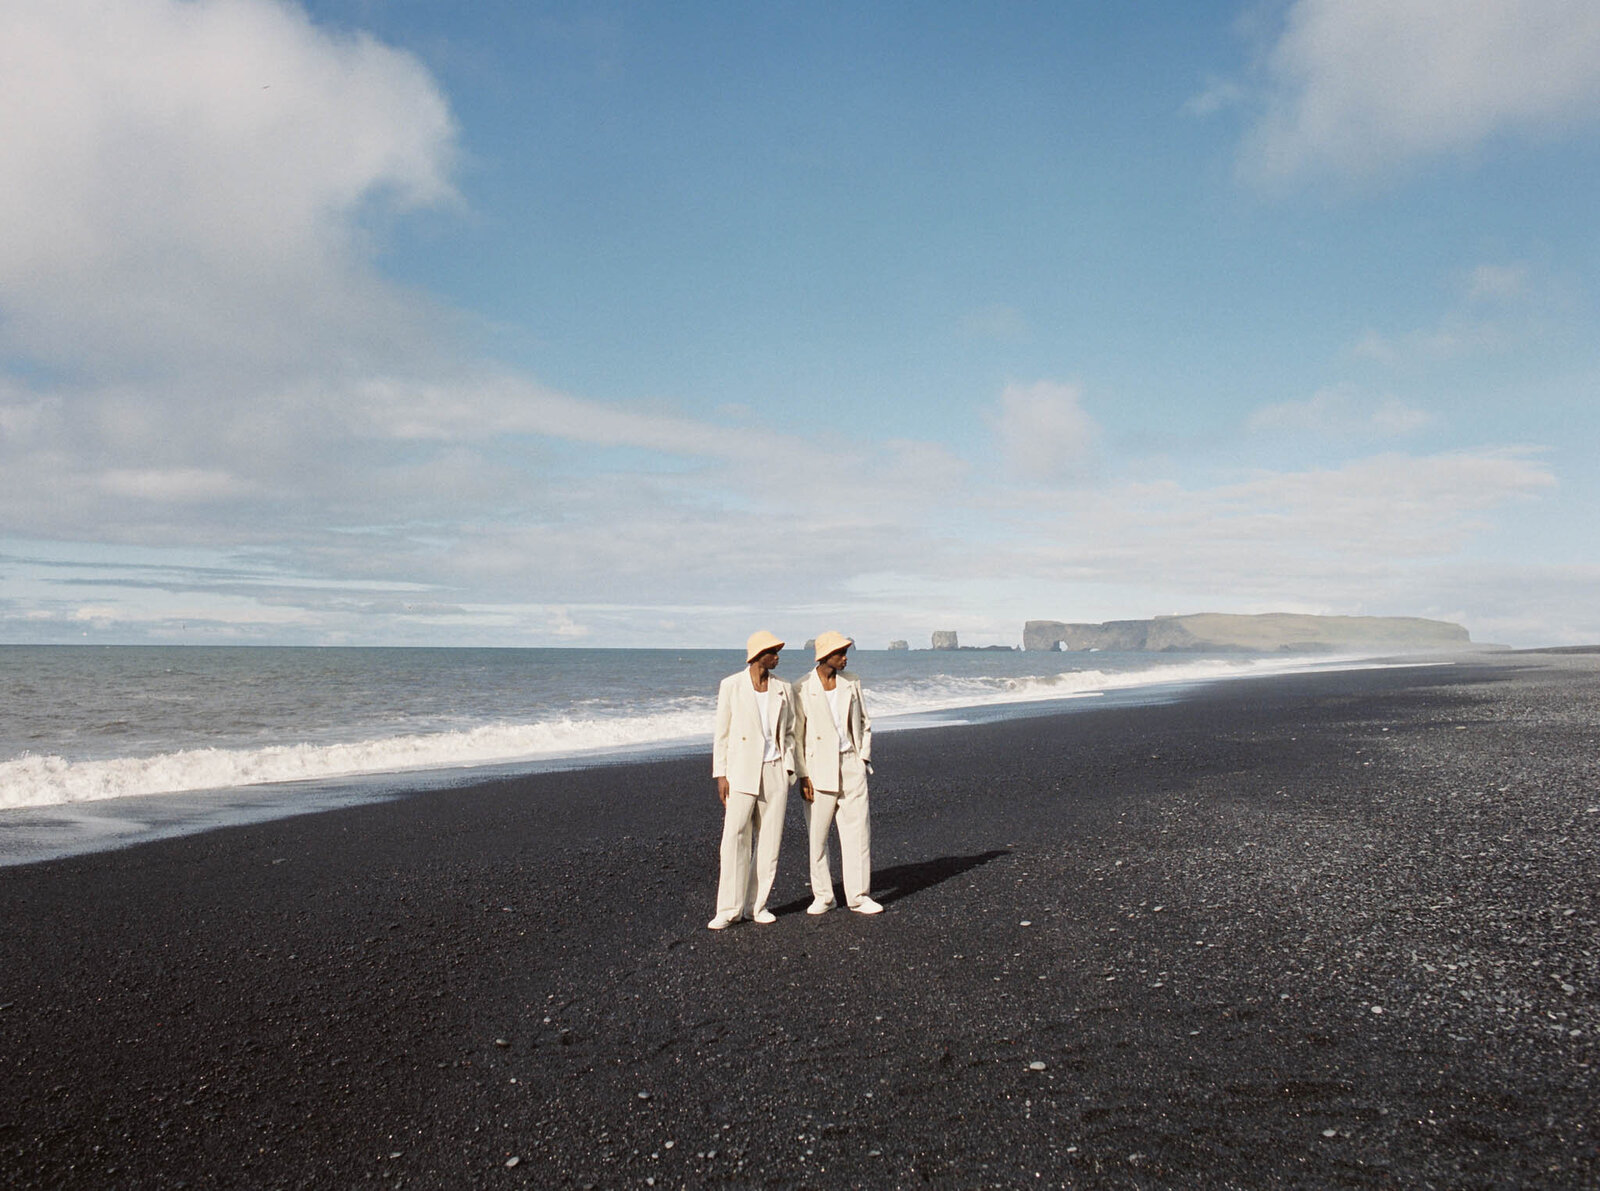 Two young men on a beach in Iceland